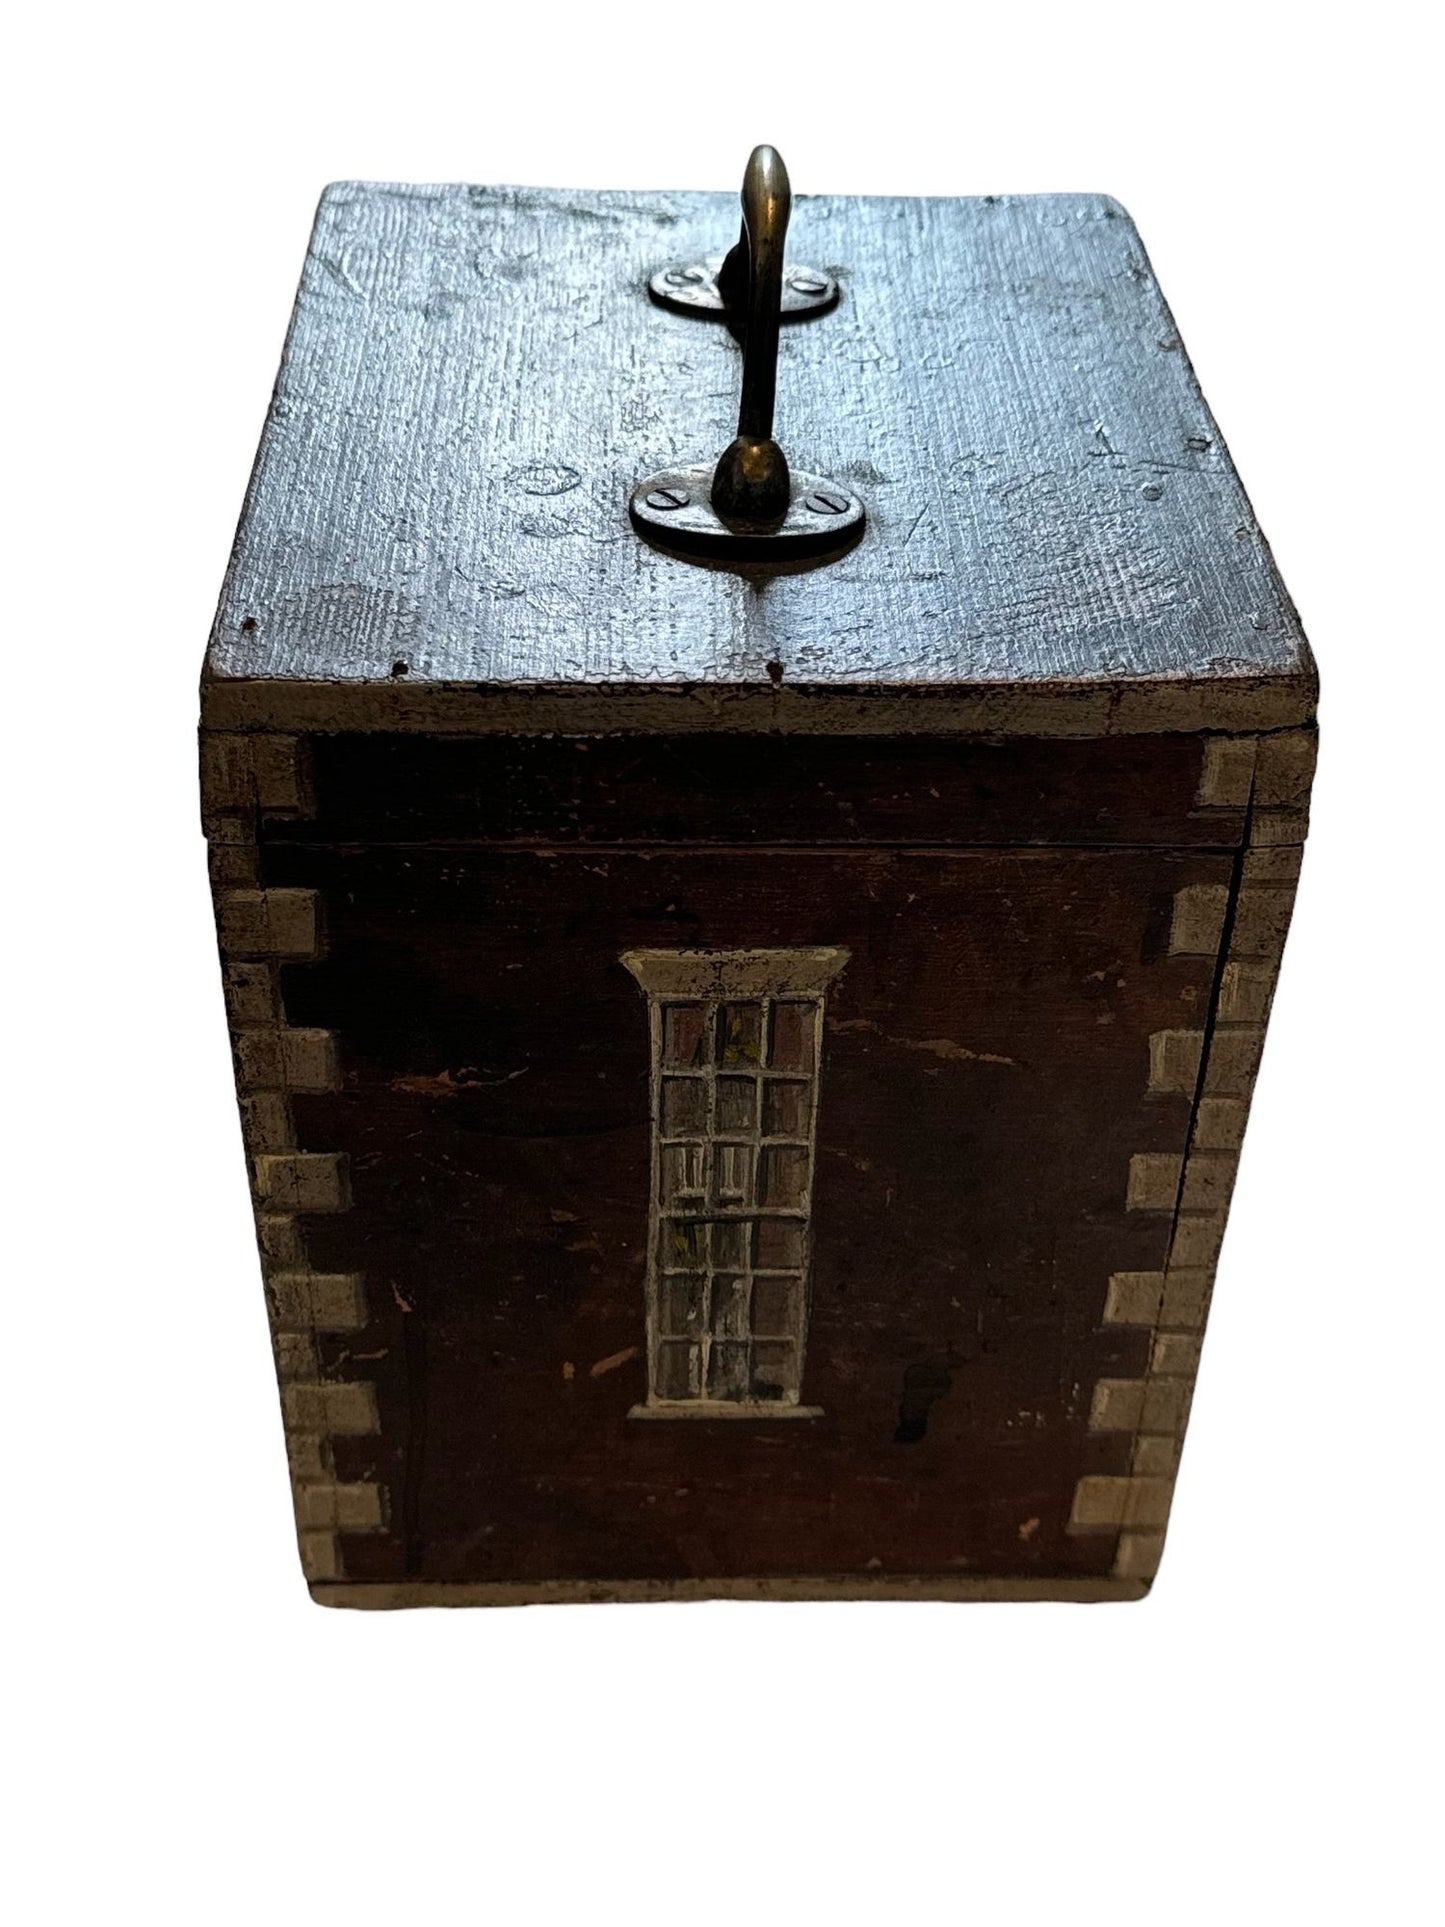 An English Box with Handle painted to look like a Georgian House, Early 19th Century